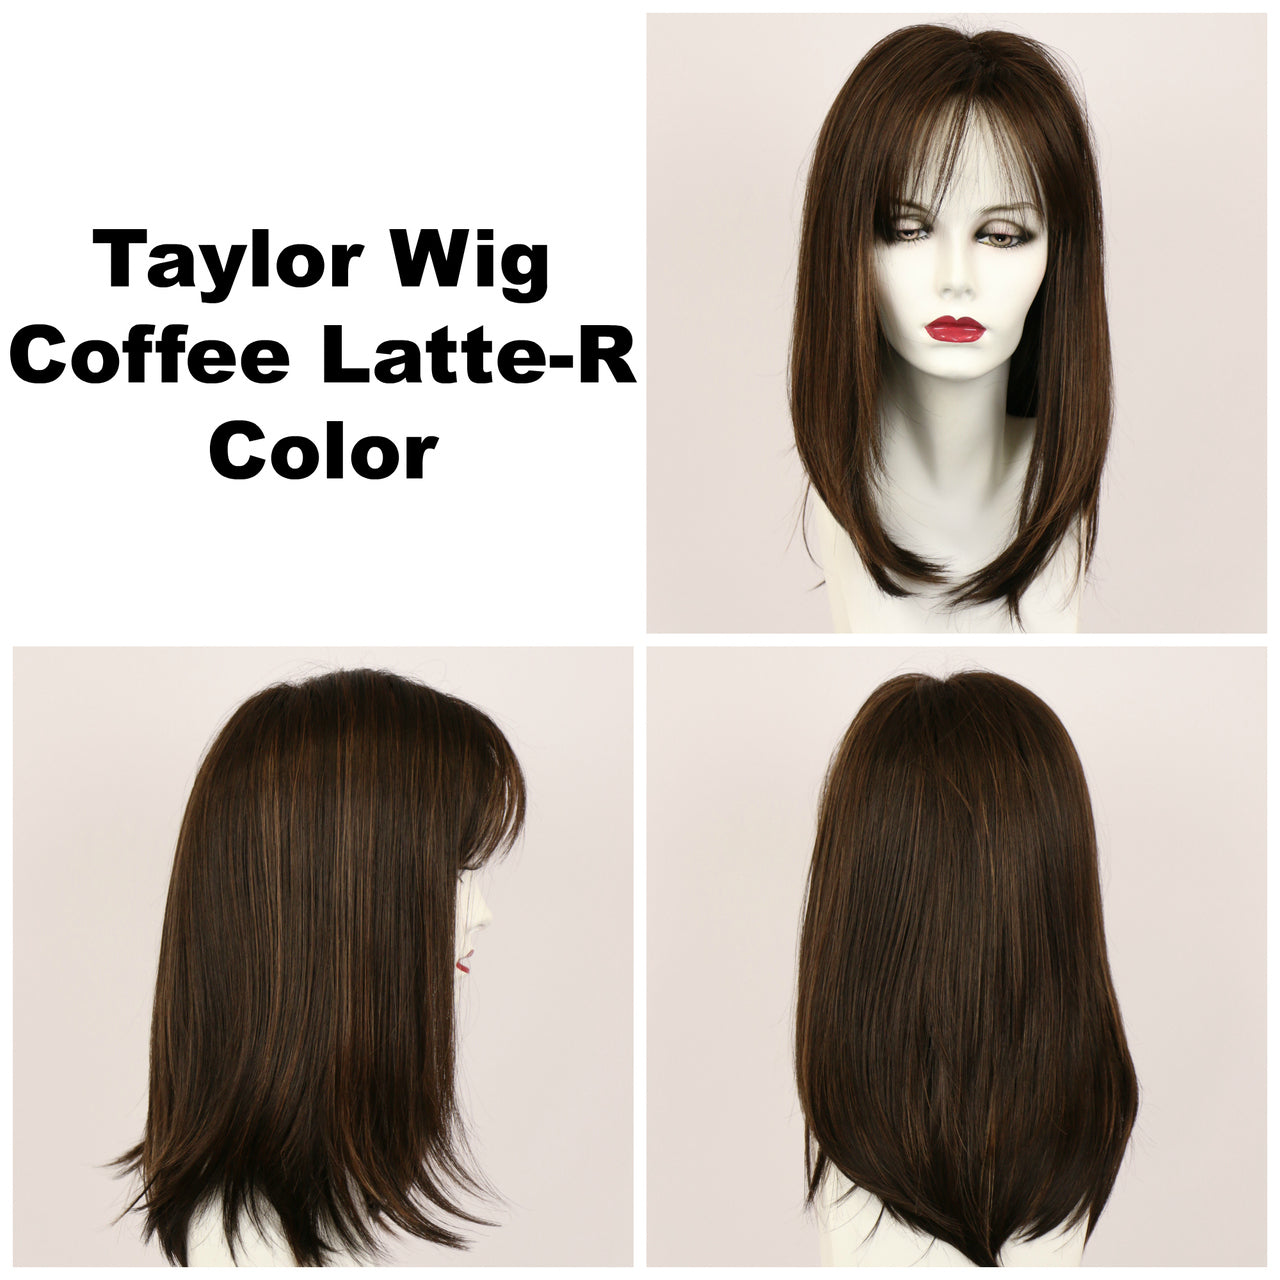 Coffee Latte-R / Taylor w/ Roots / Long Wig